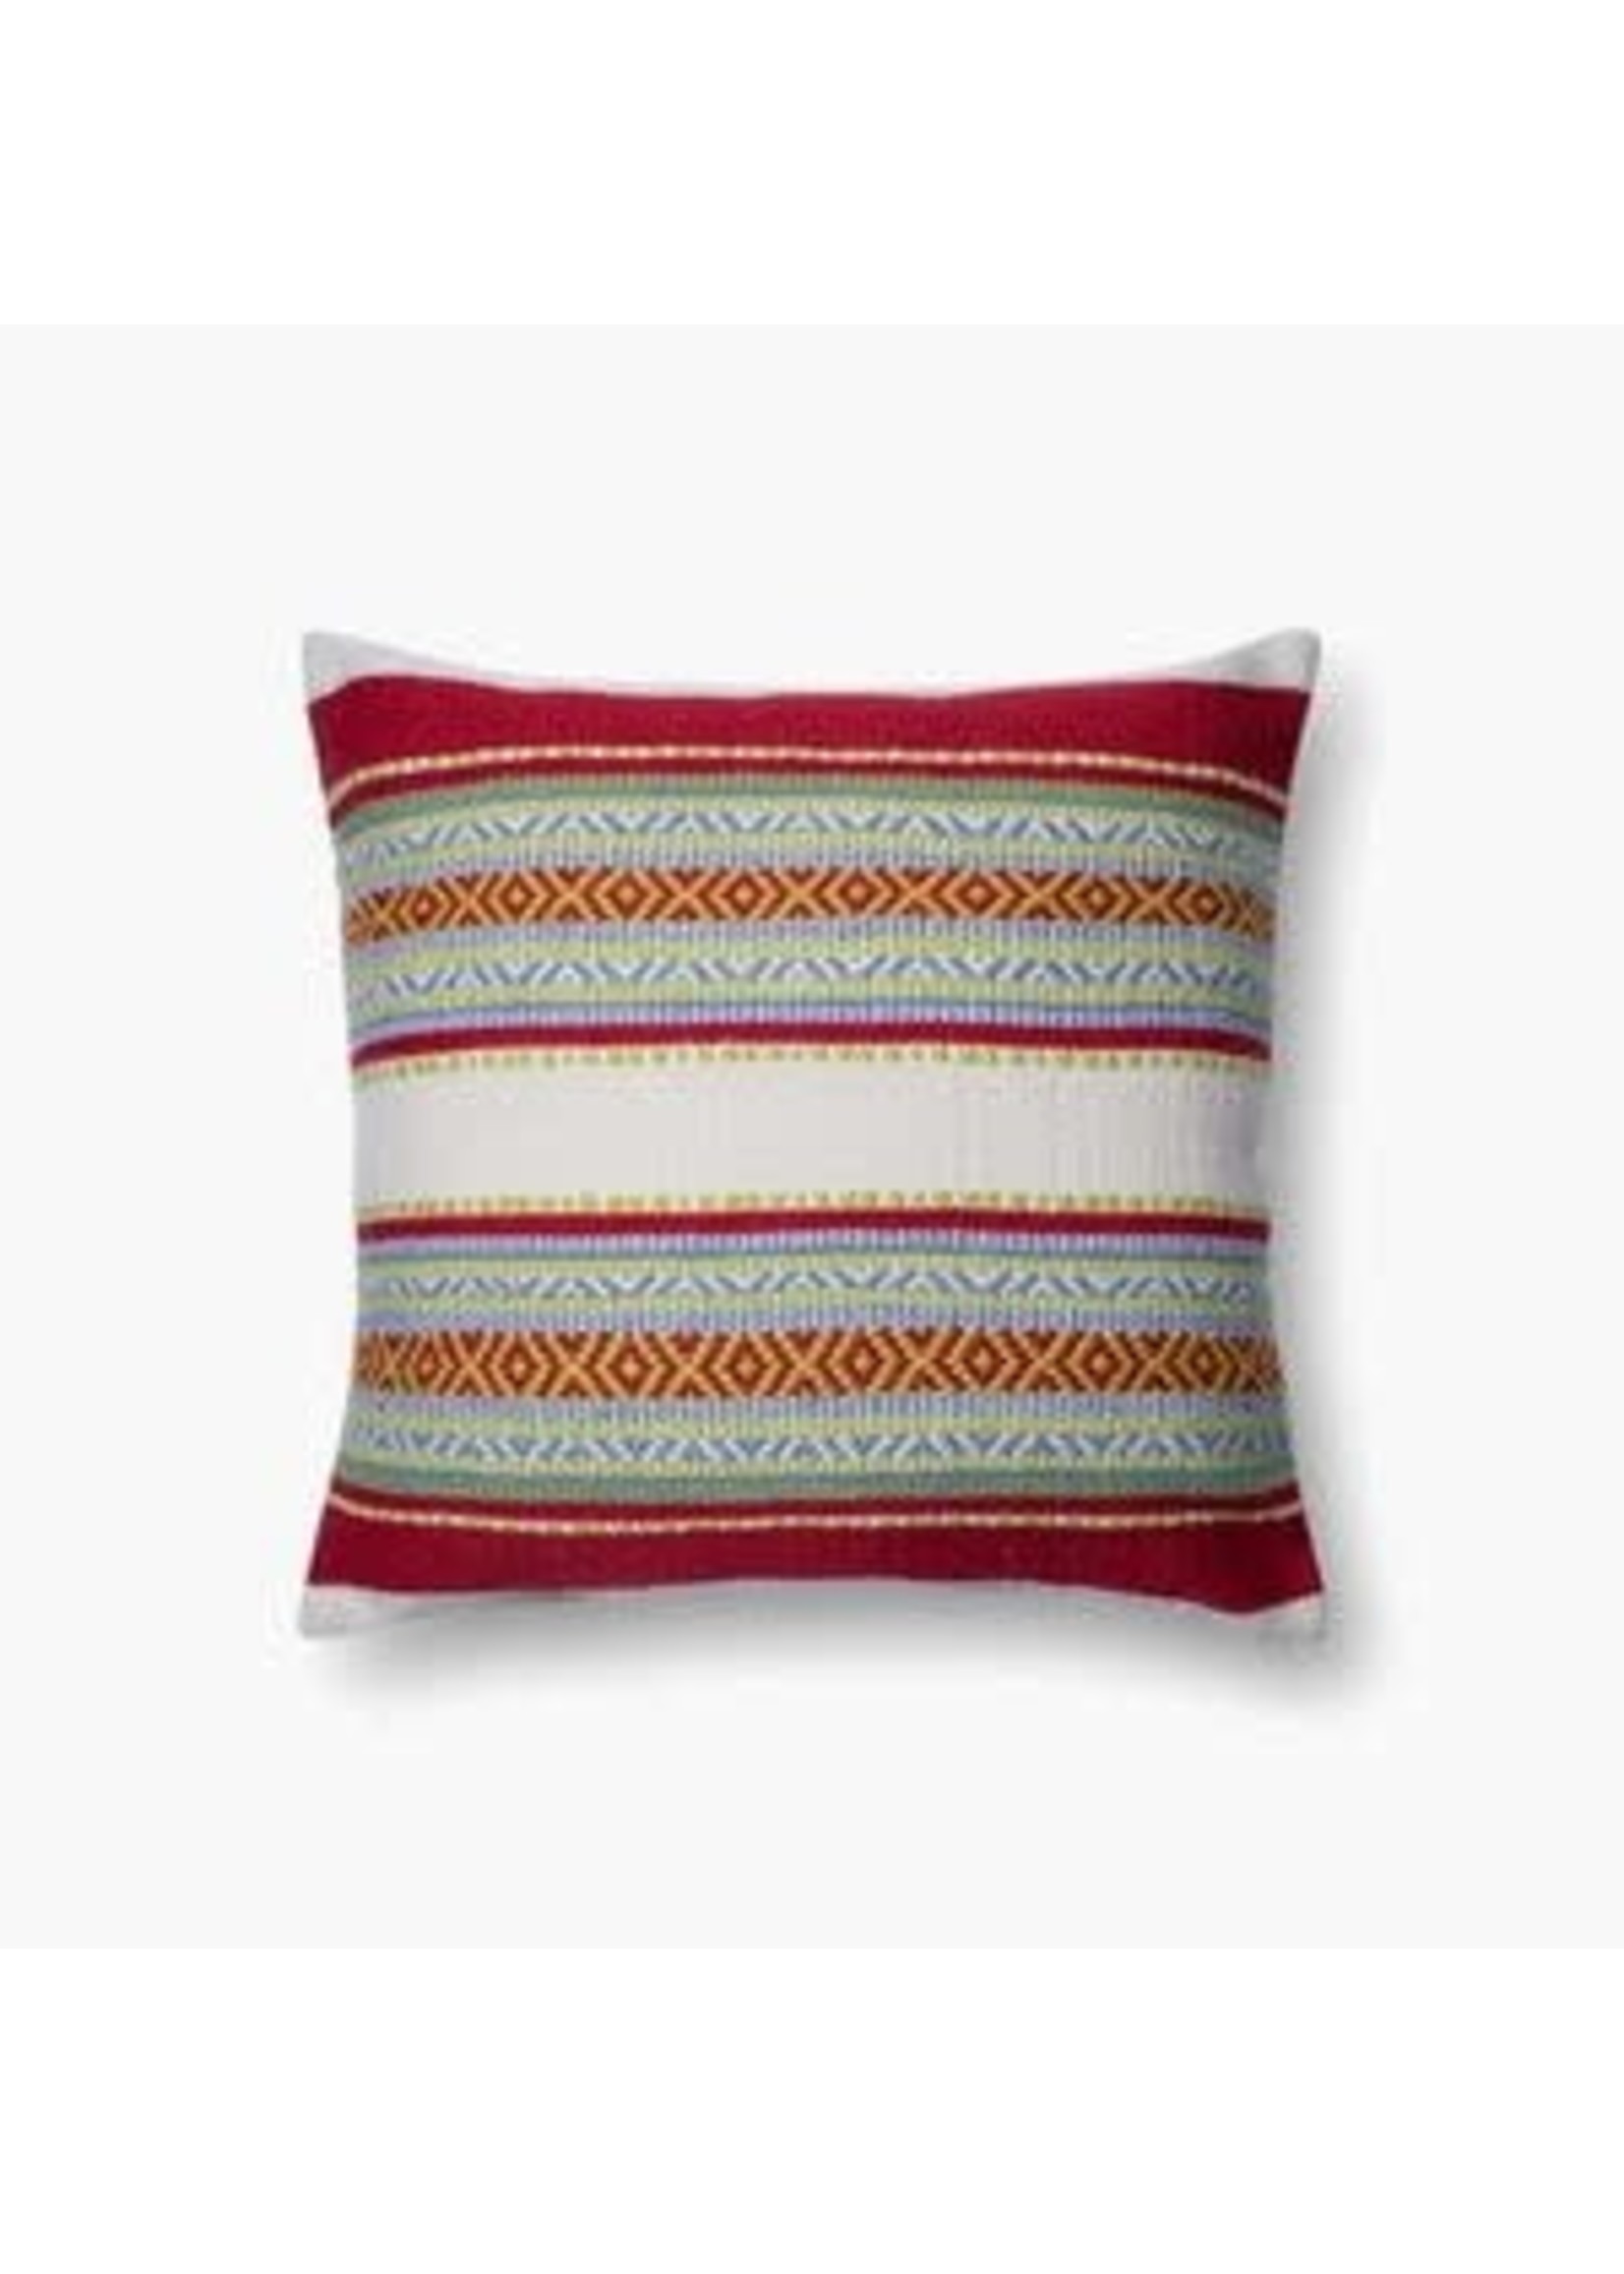 22 x 22 RED/MULTI PILLOW